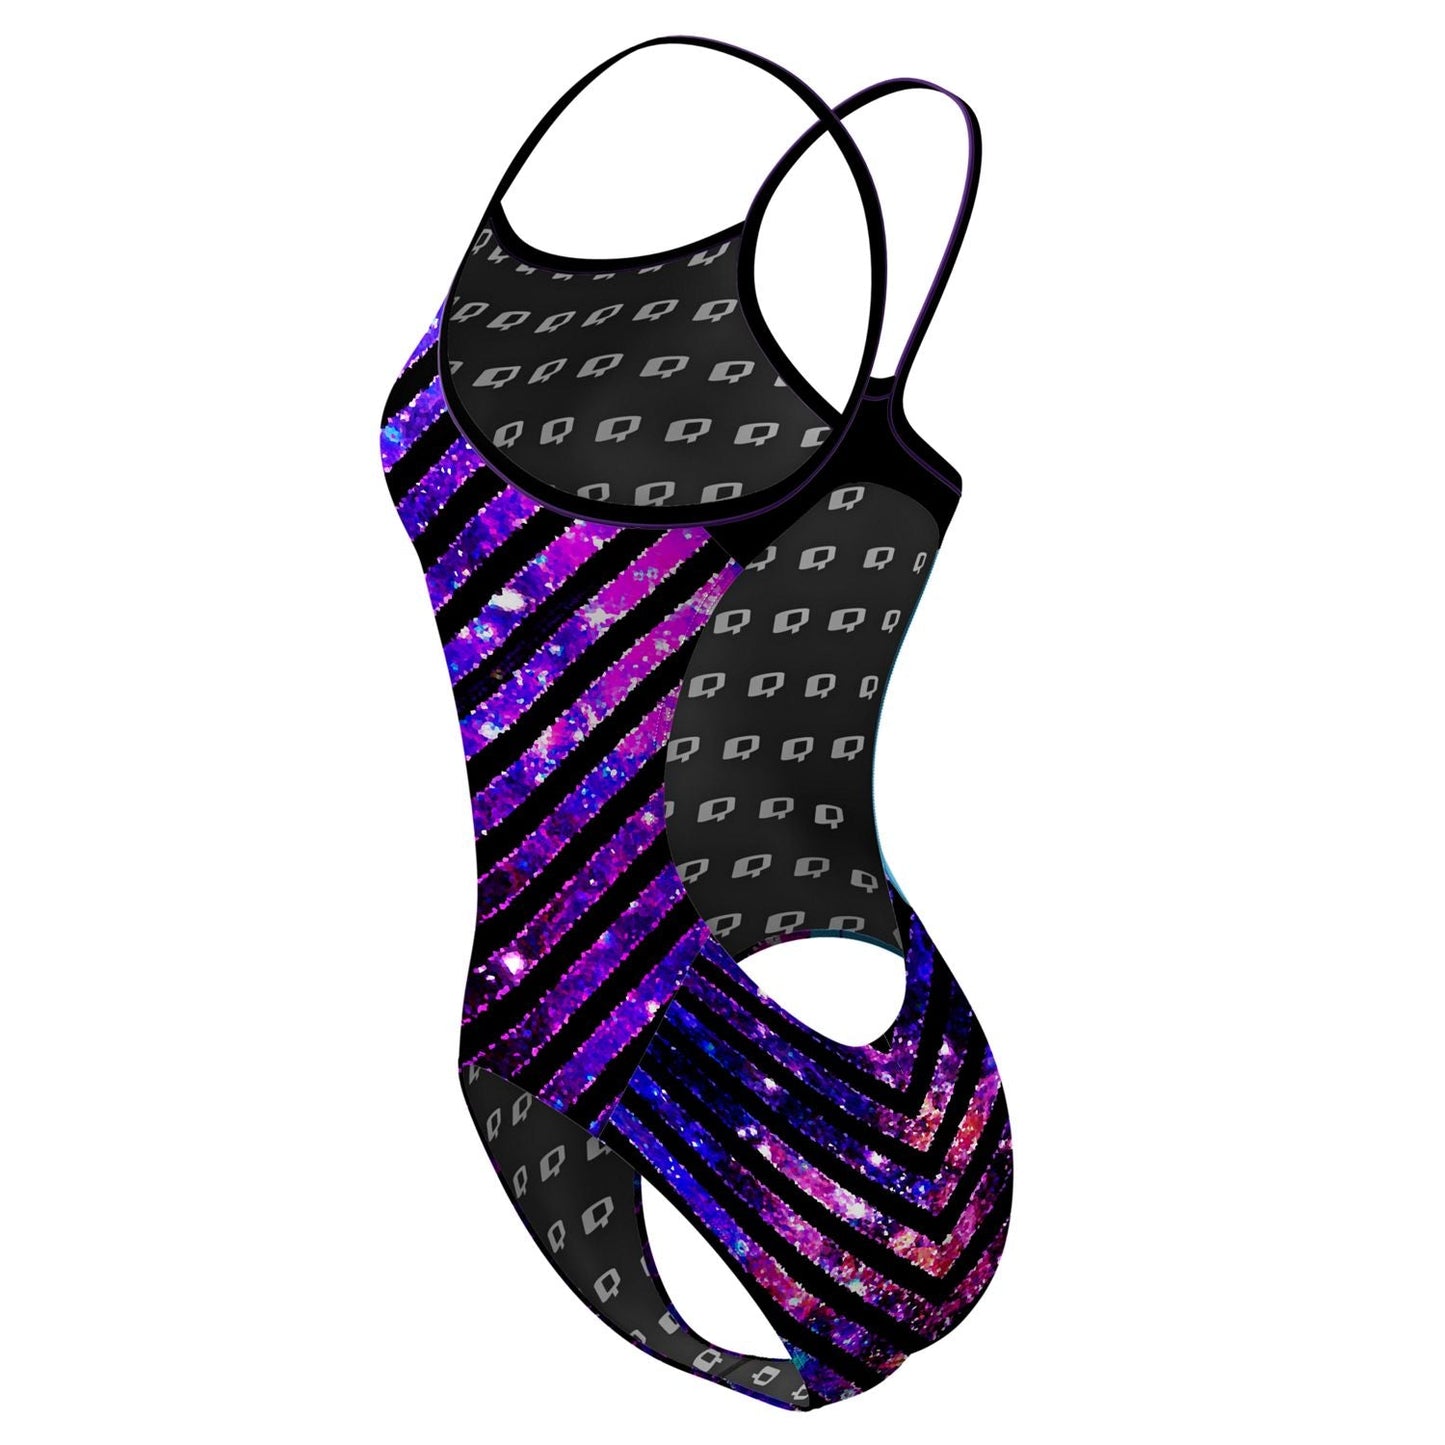 Into the Galaxy Skinny Strap Swimsuit